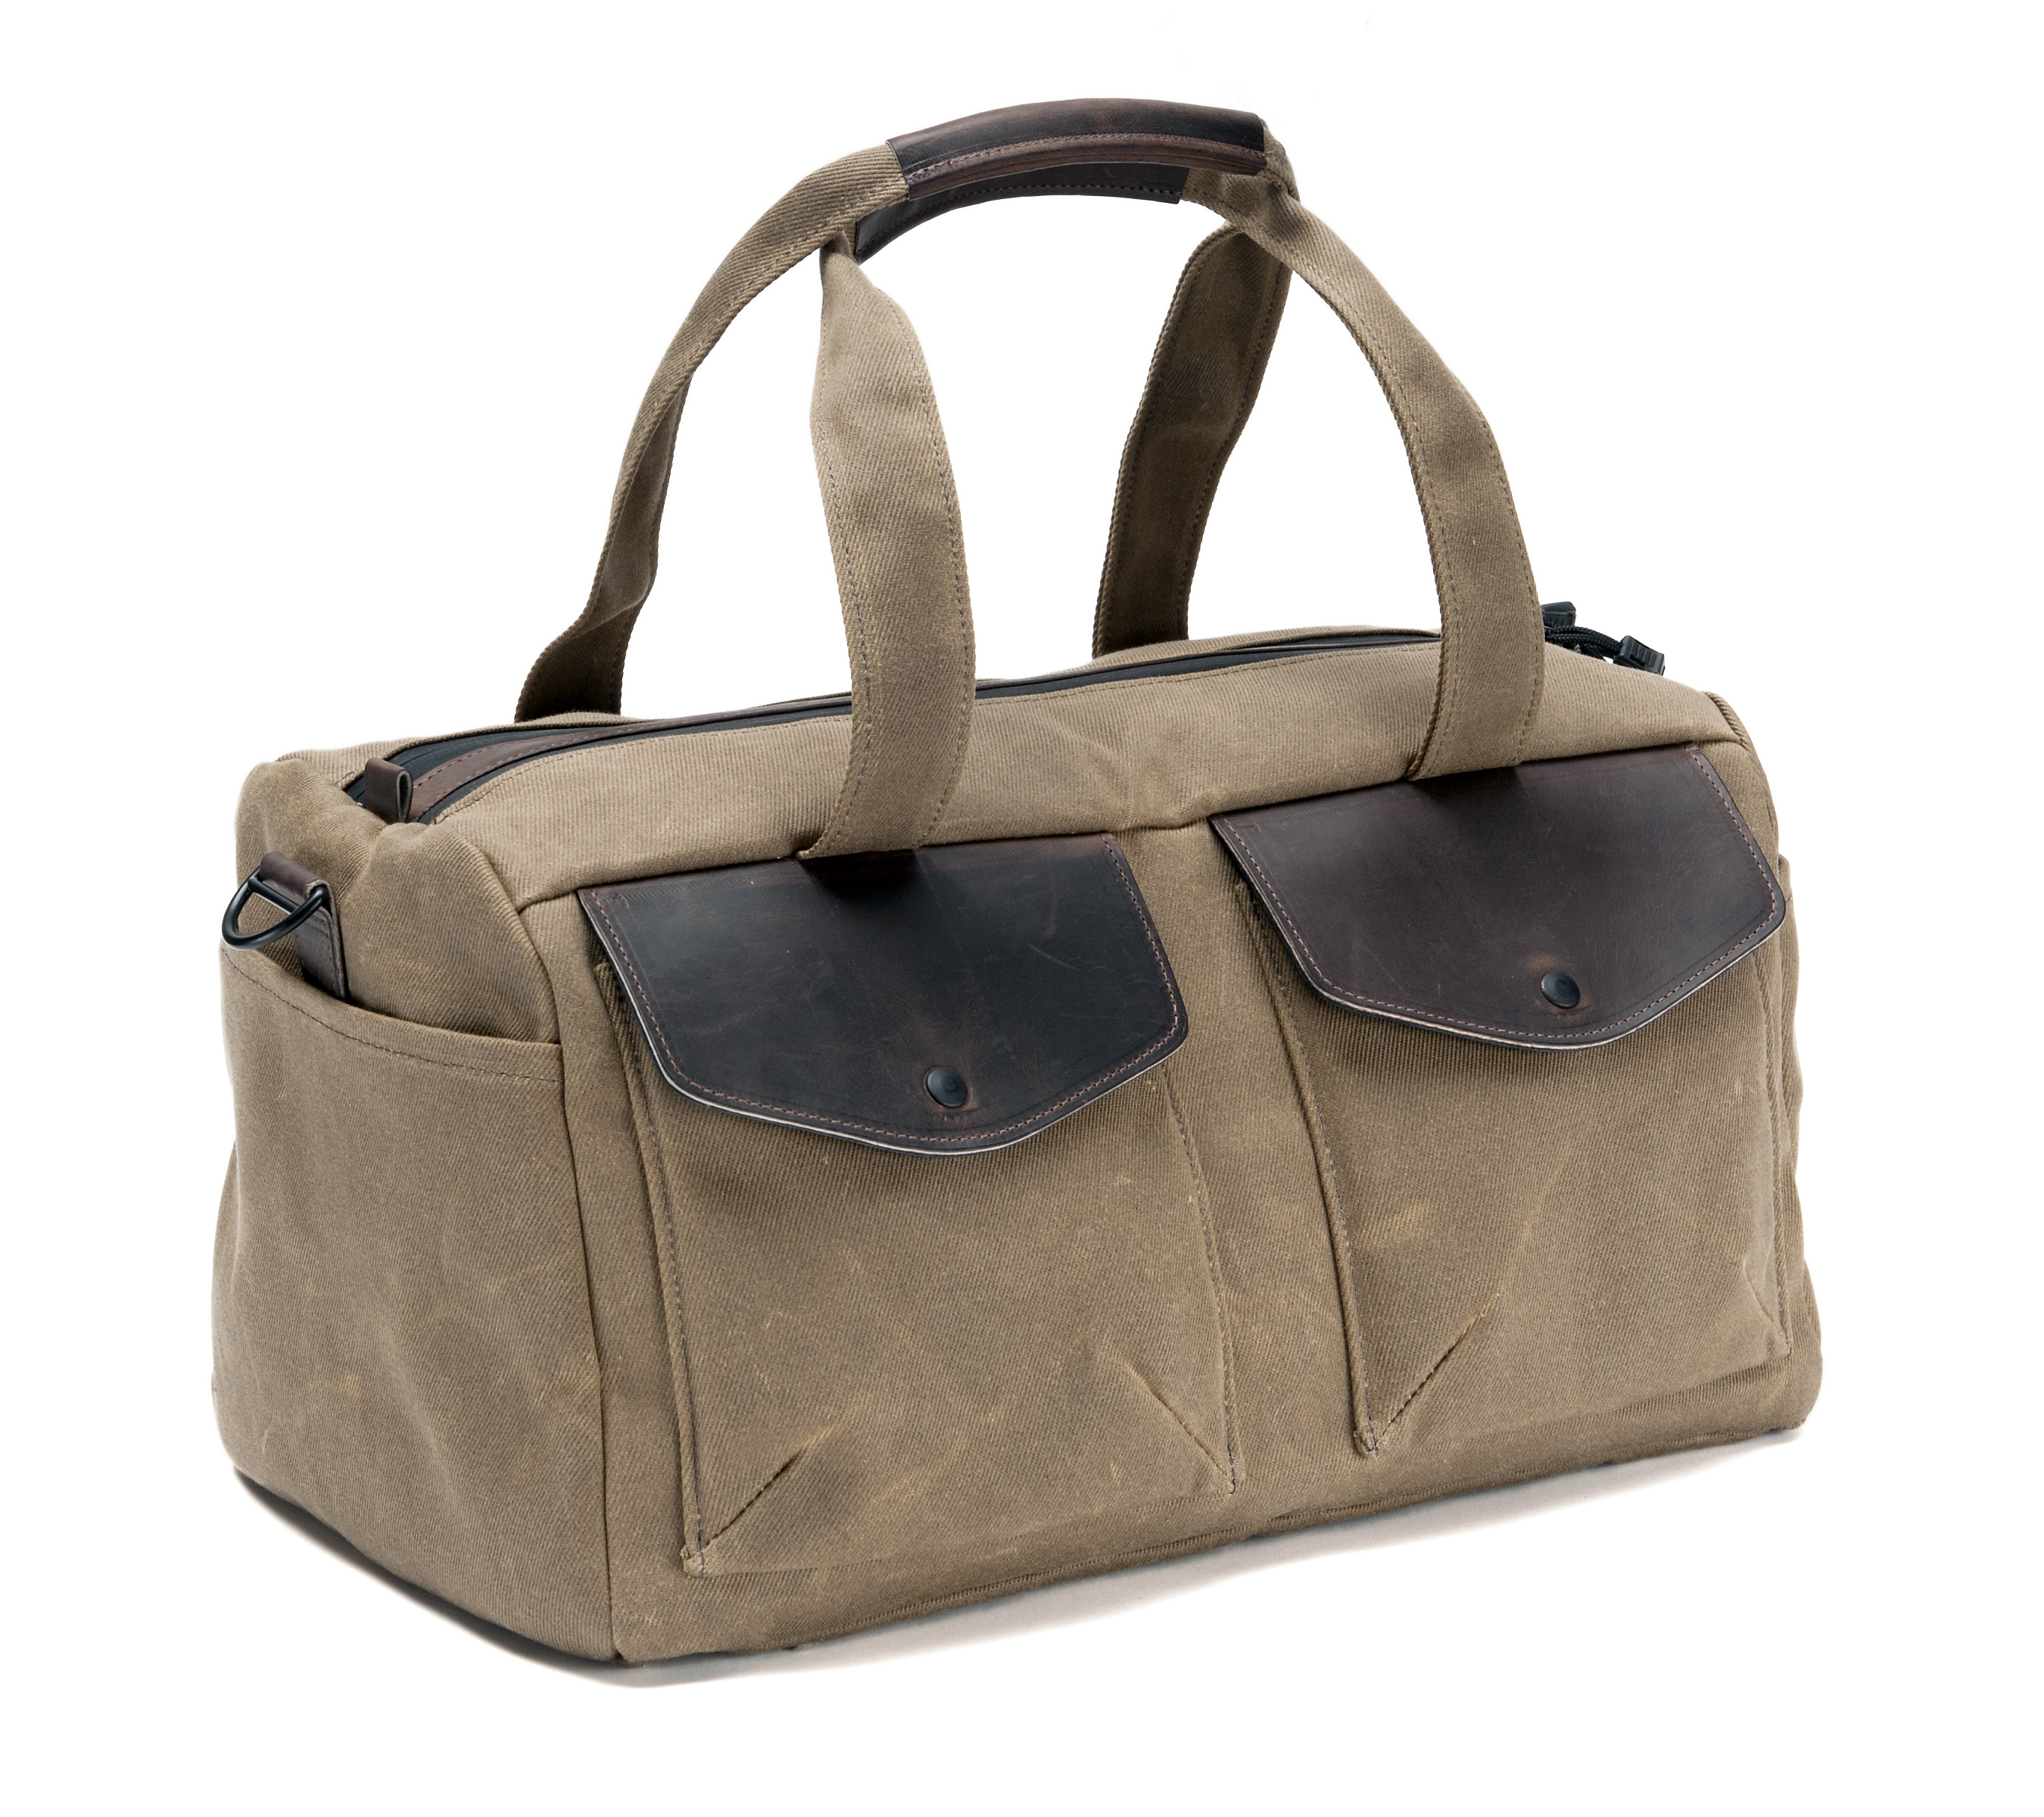 The Outback Duffel